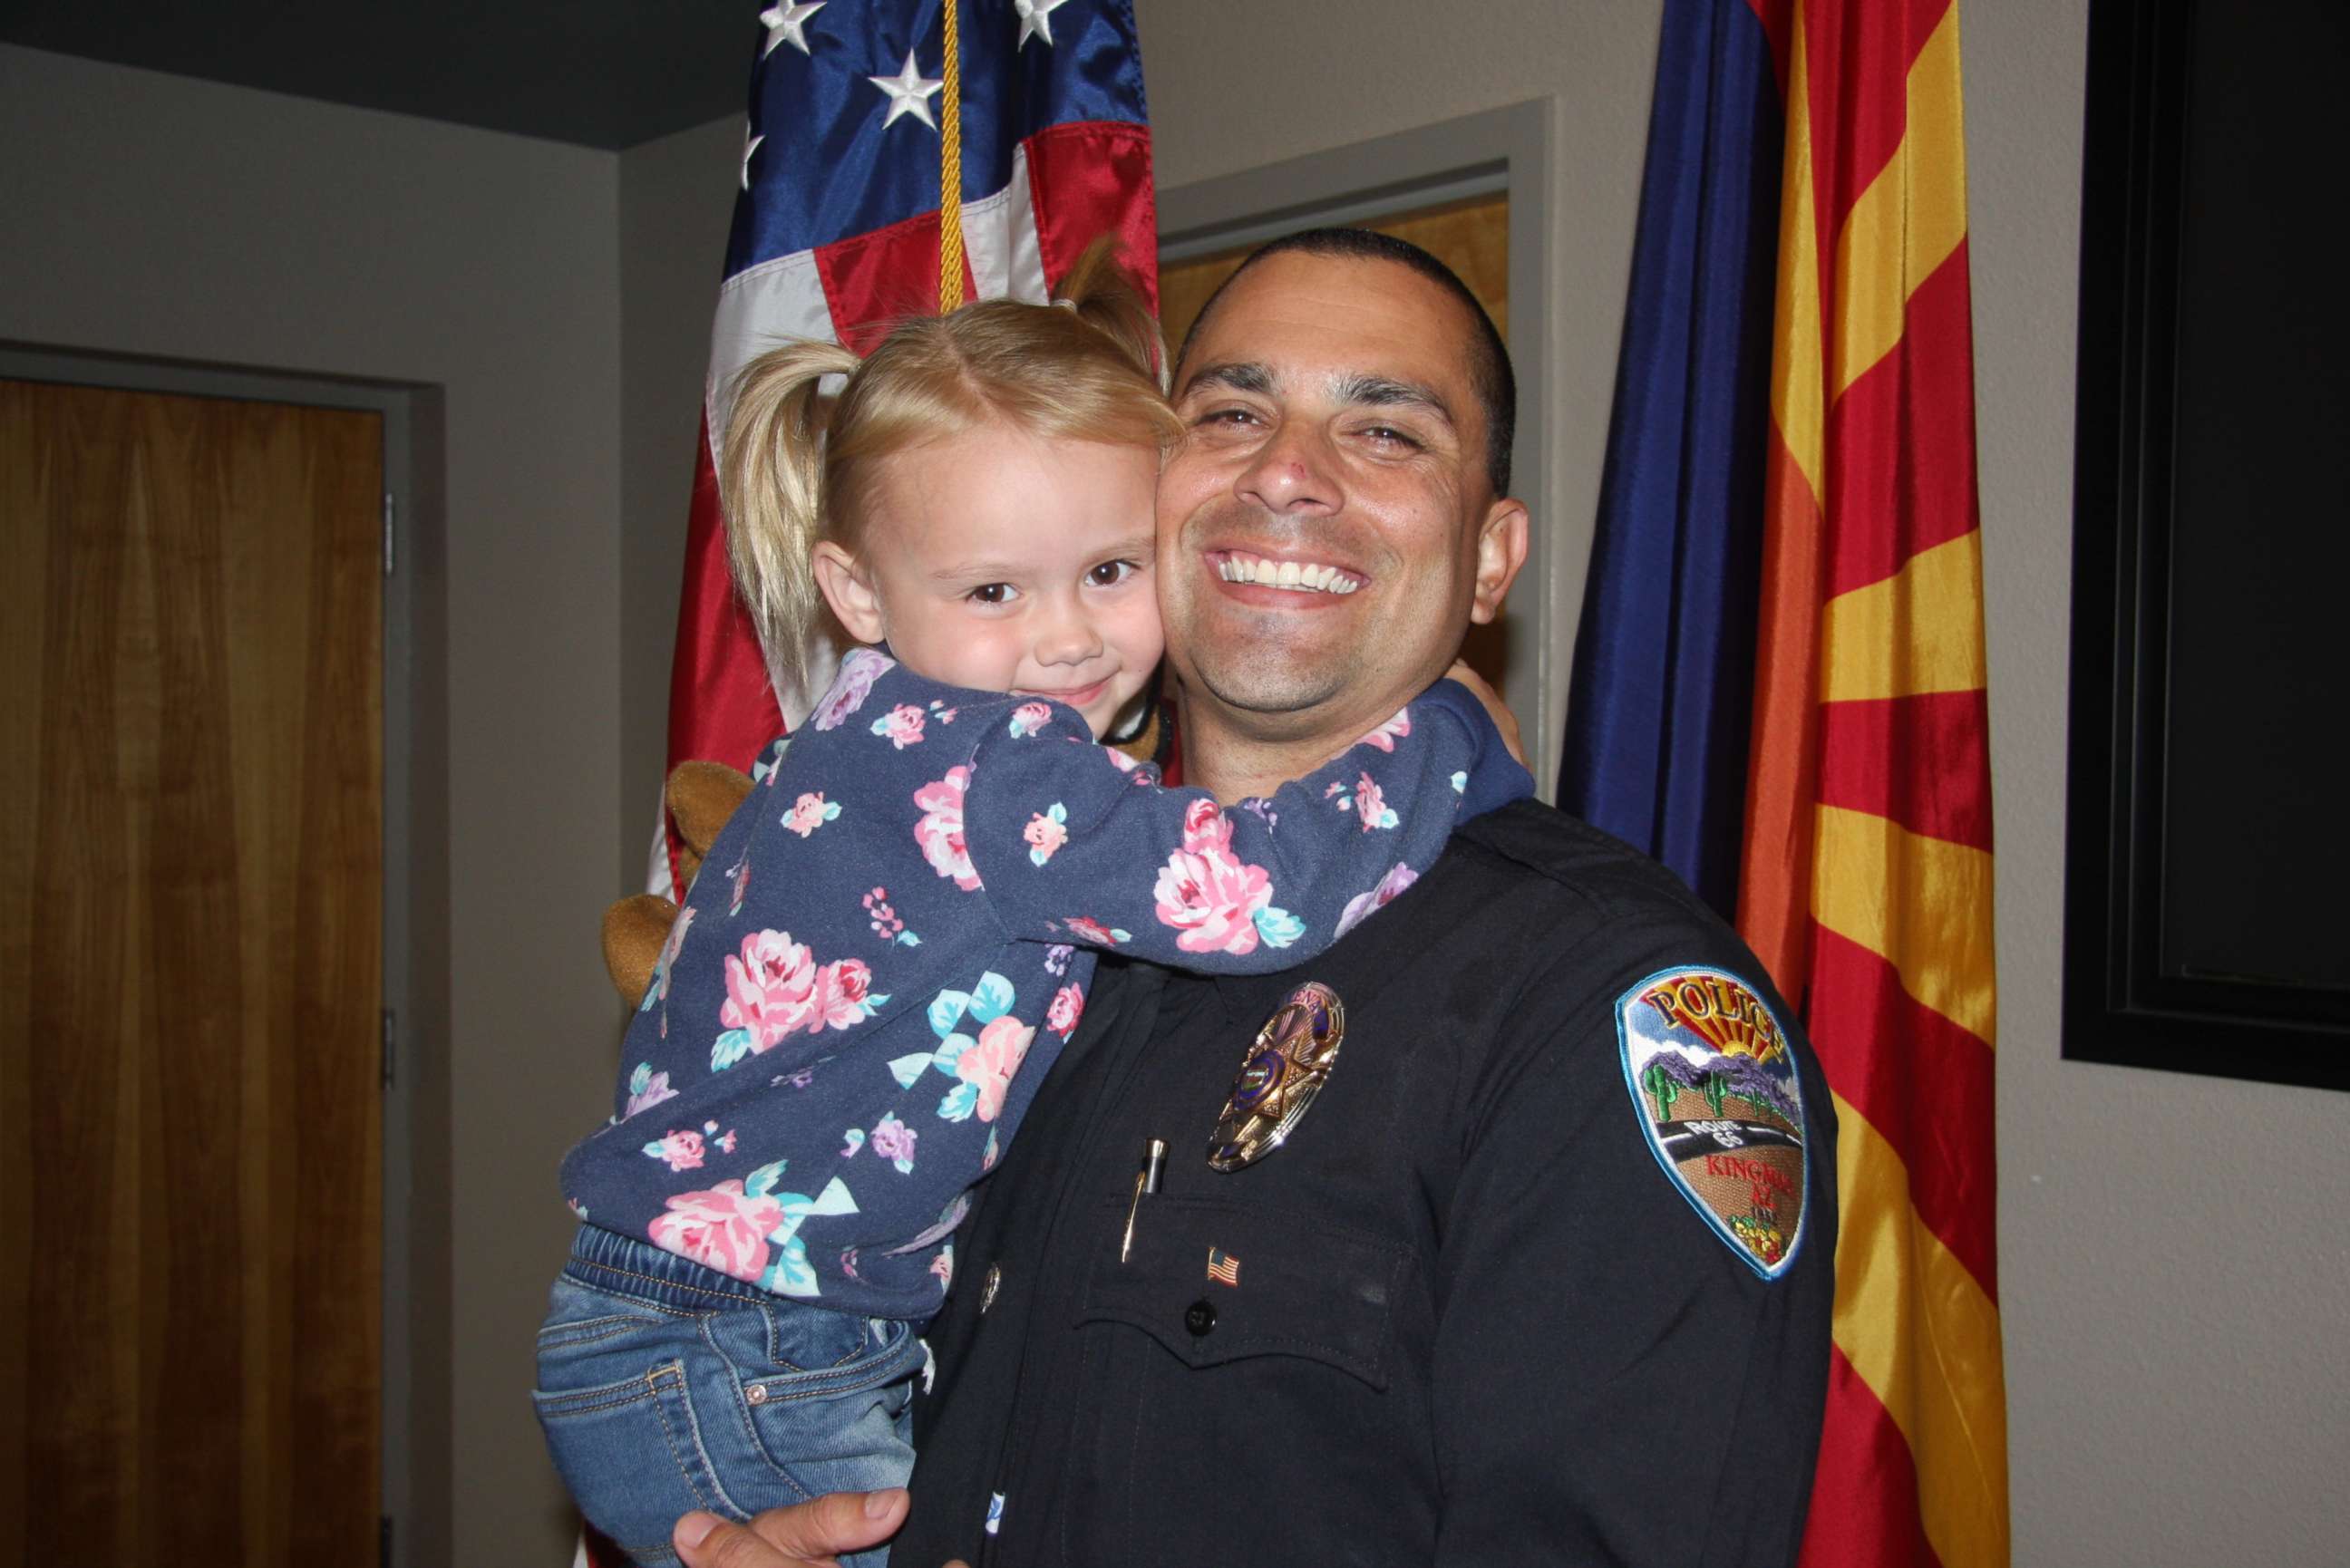 PHOTO: On Aug. 18, 2020, Brian Zach, lieutenant of the Kingman Police Department in Arizona, and his wife Cierra, officially became parents to 4-year-old Kaila. The adoption of Kaila took place at Mohave County Superior Court in Lake Havasu City.